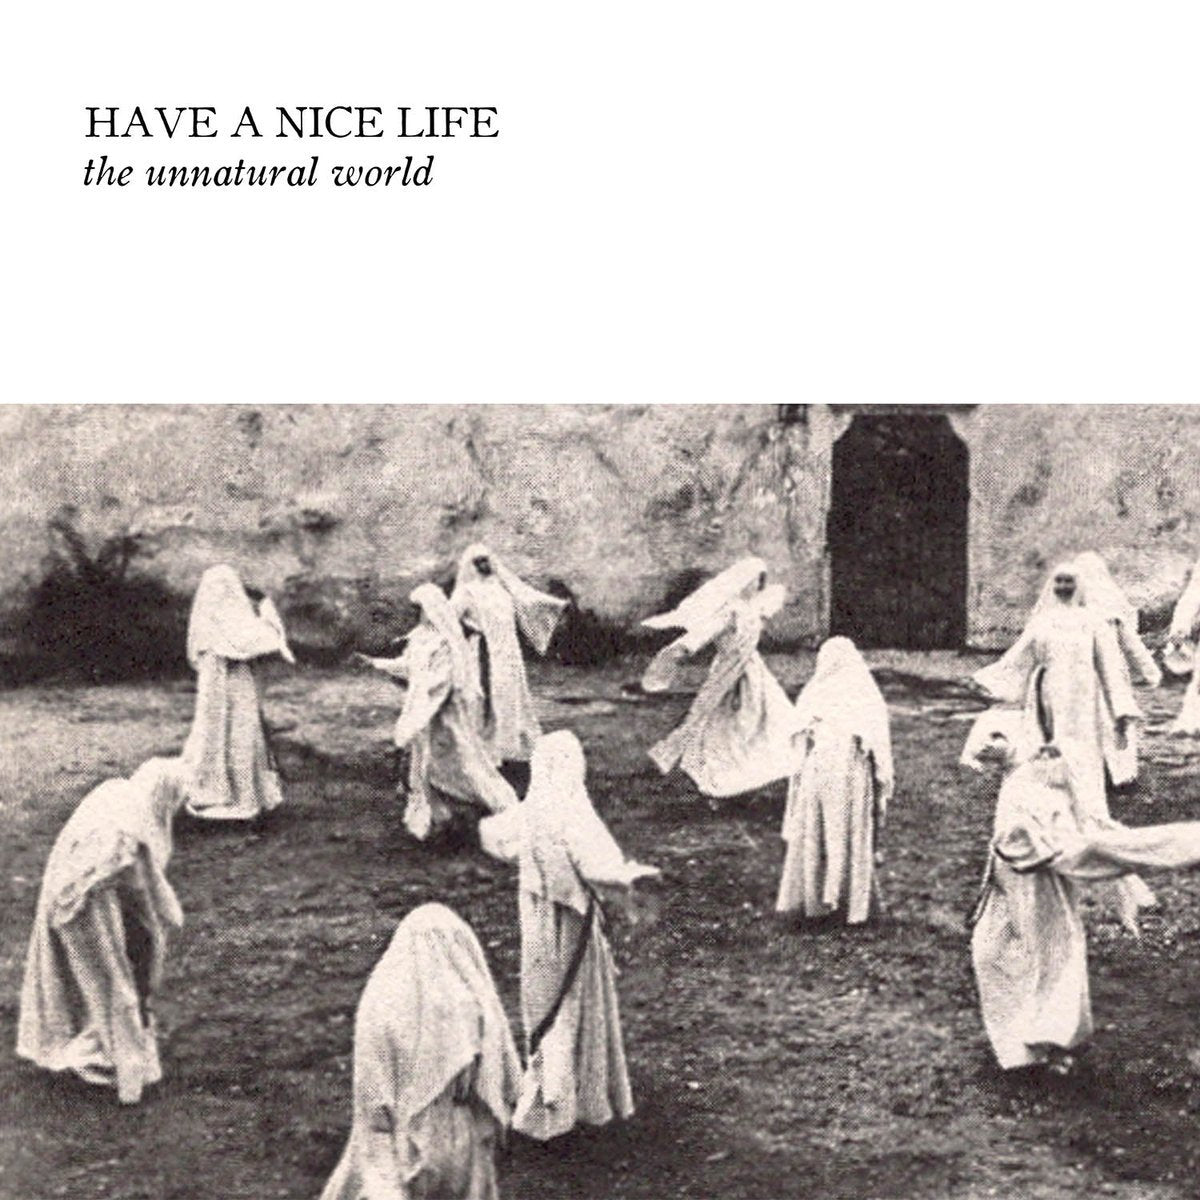 HAVE A NICE LIFE "The Unnatural World" Tape